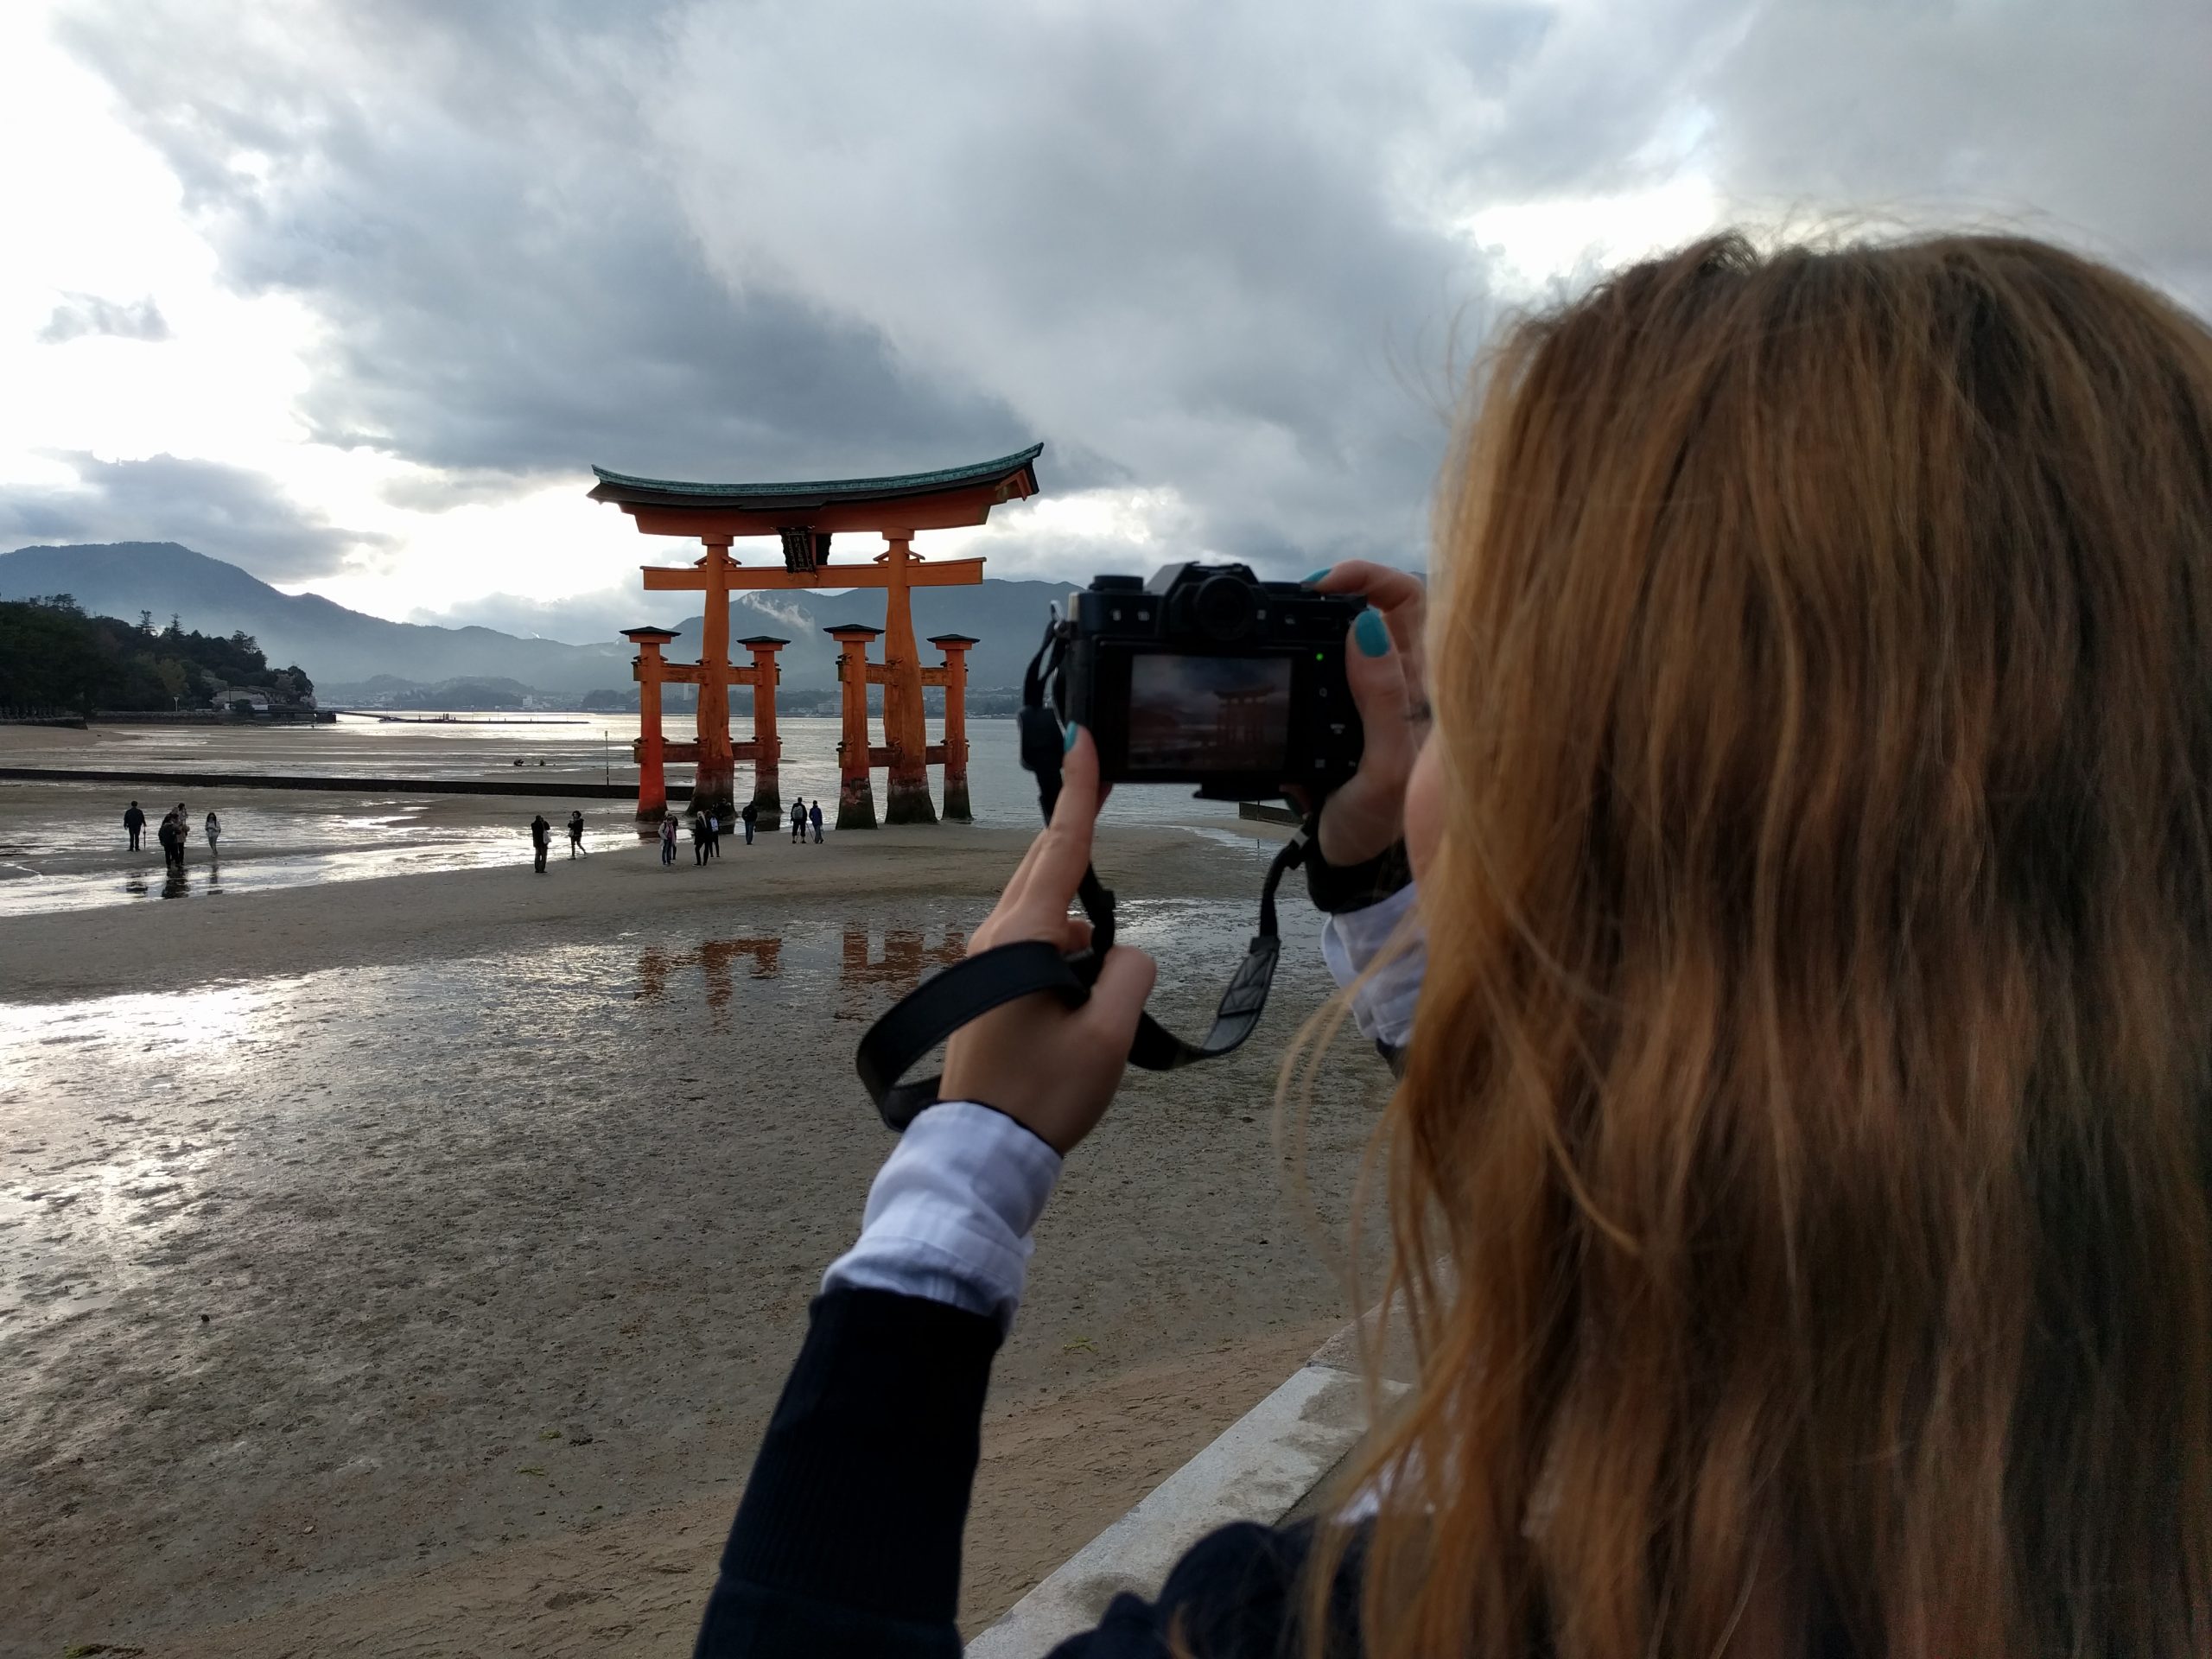 Cory photographing the Itsukushima shrine in Japan